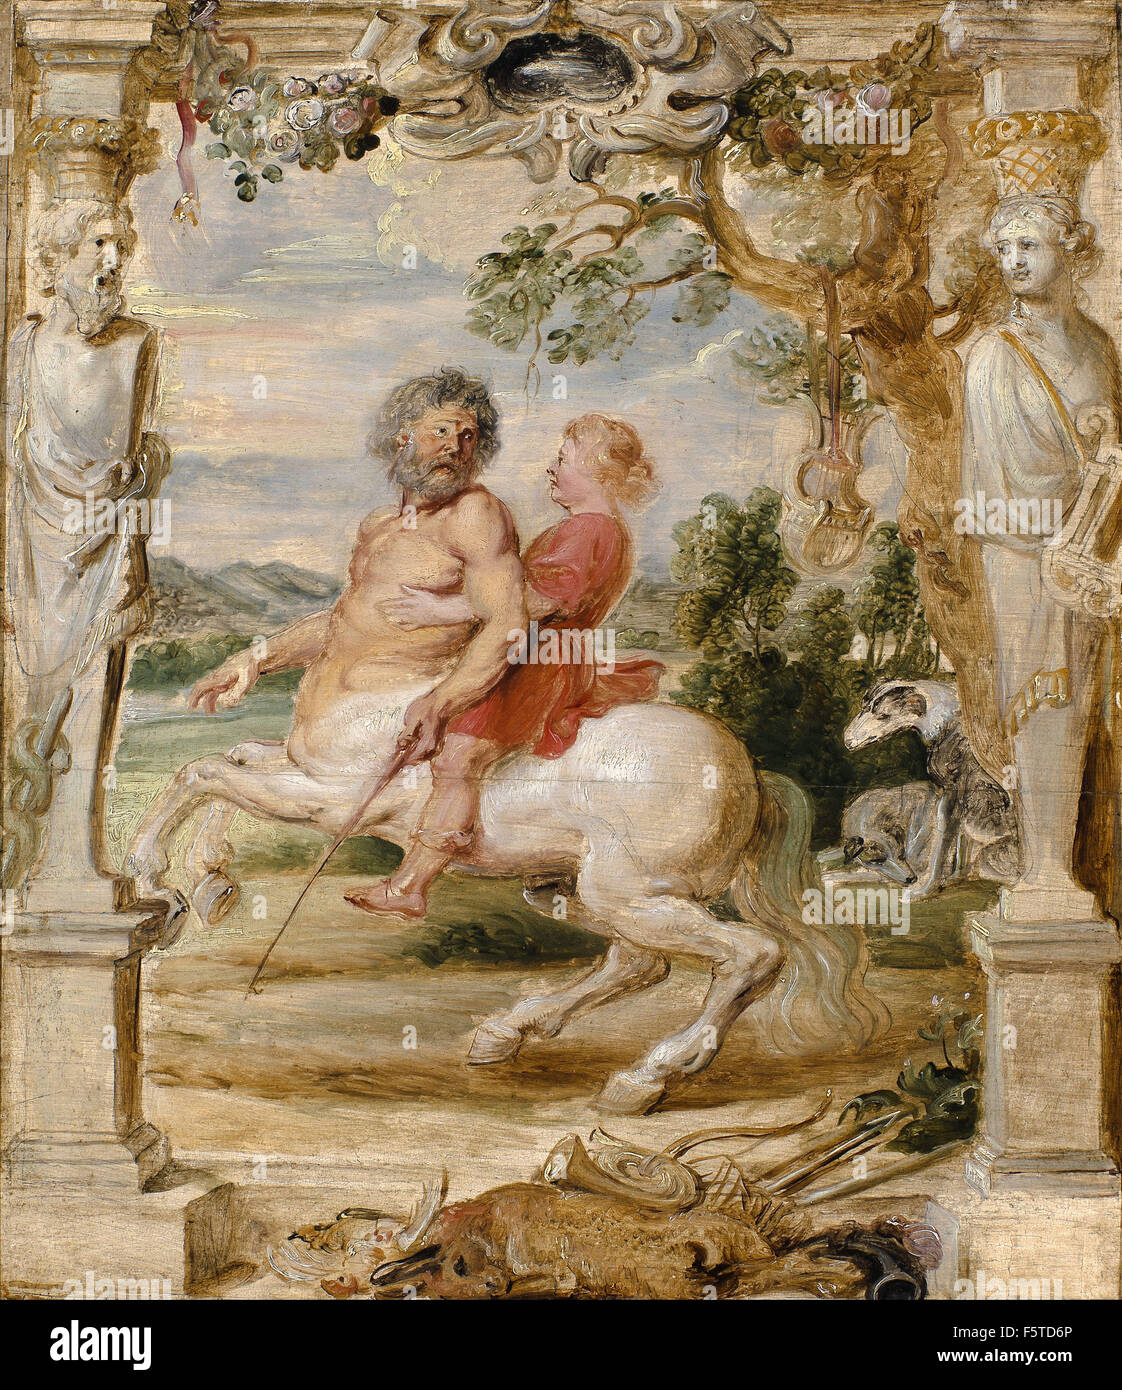 Peter Paul Rubens - Achilles Educated by the Centaur Chiron Stock Photo